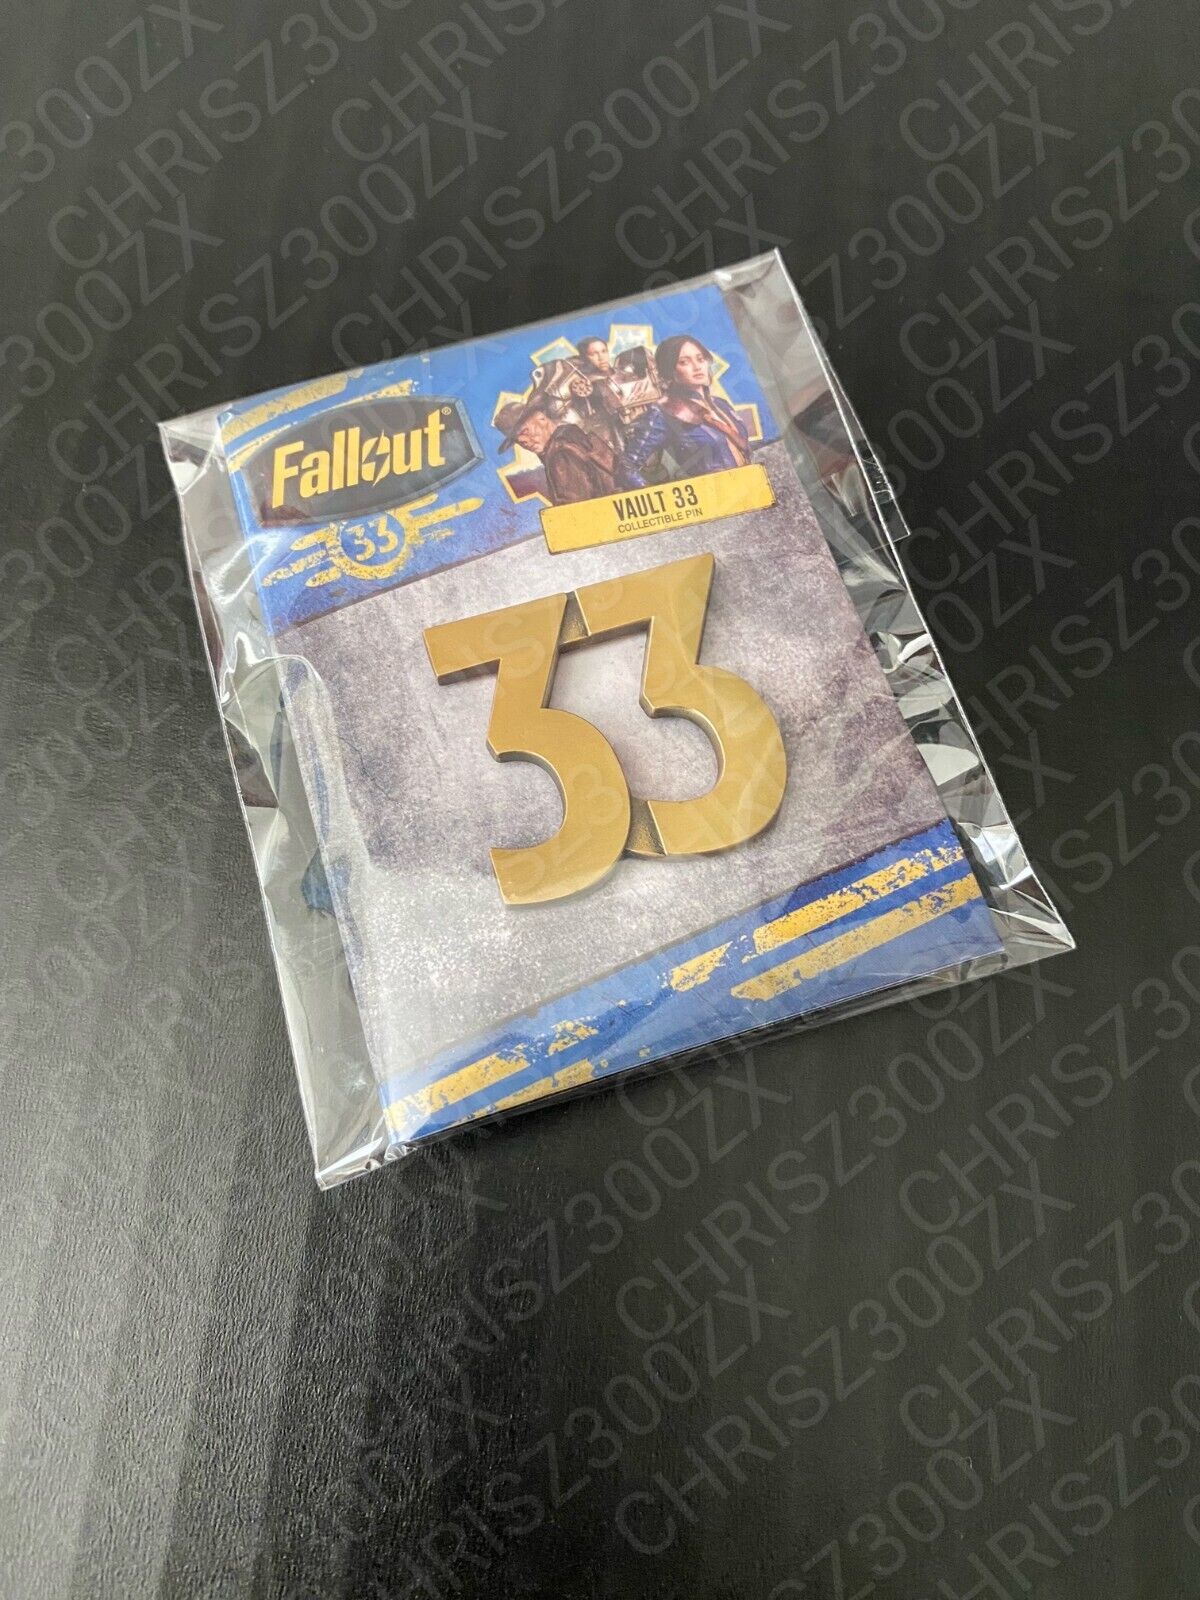 Fallout Vault 33 Collectible Enamel Metal Pin Figure Antique Gold Sandblasted